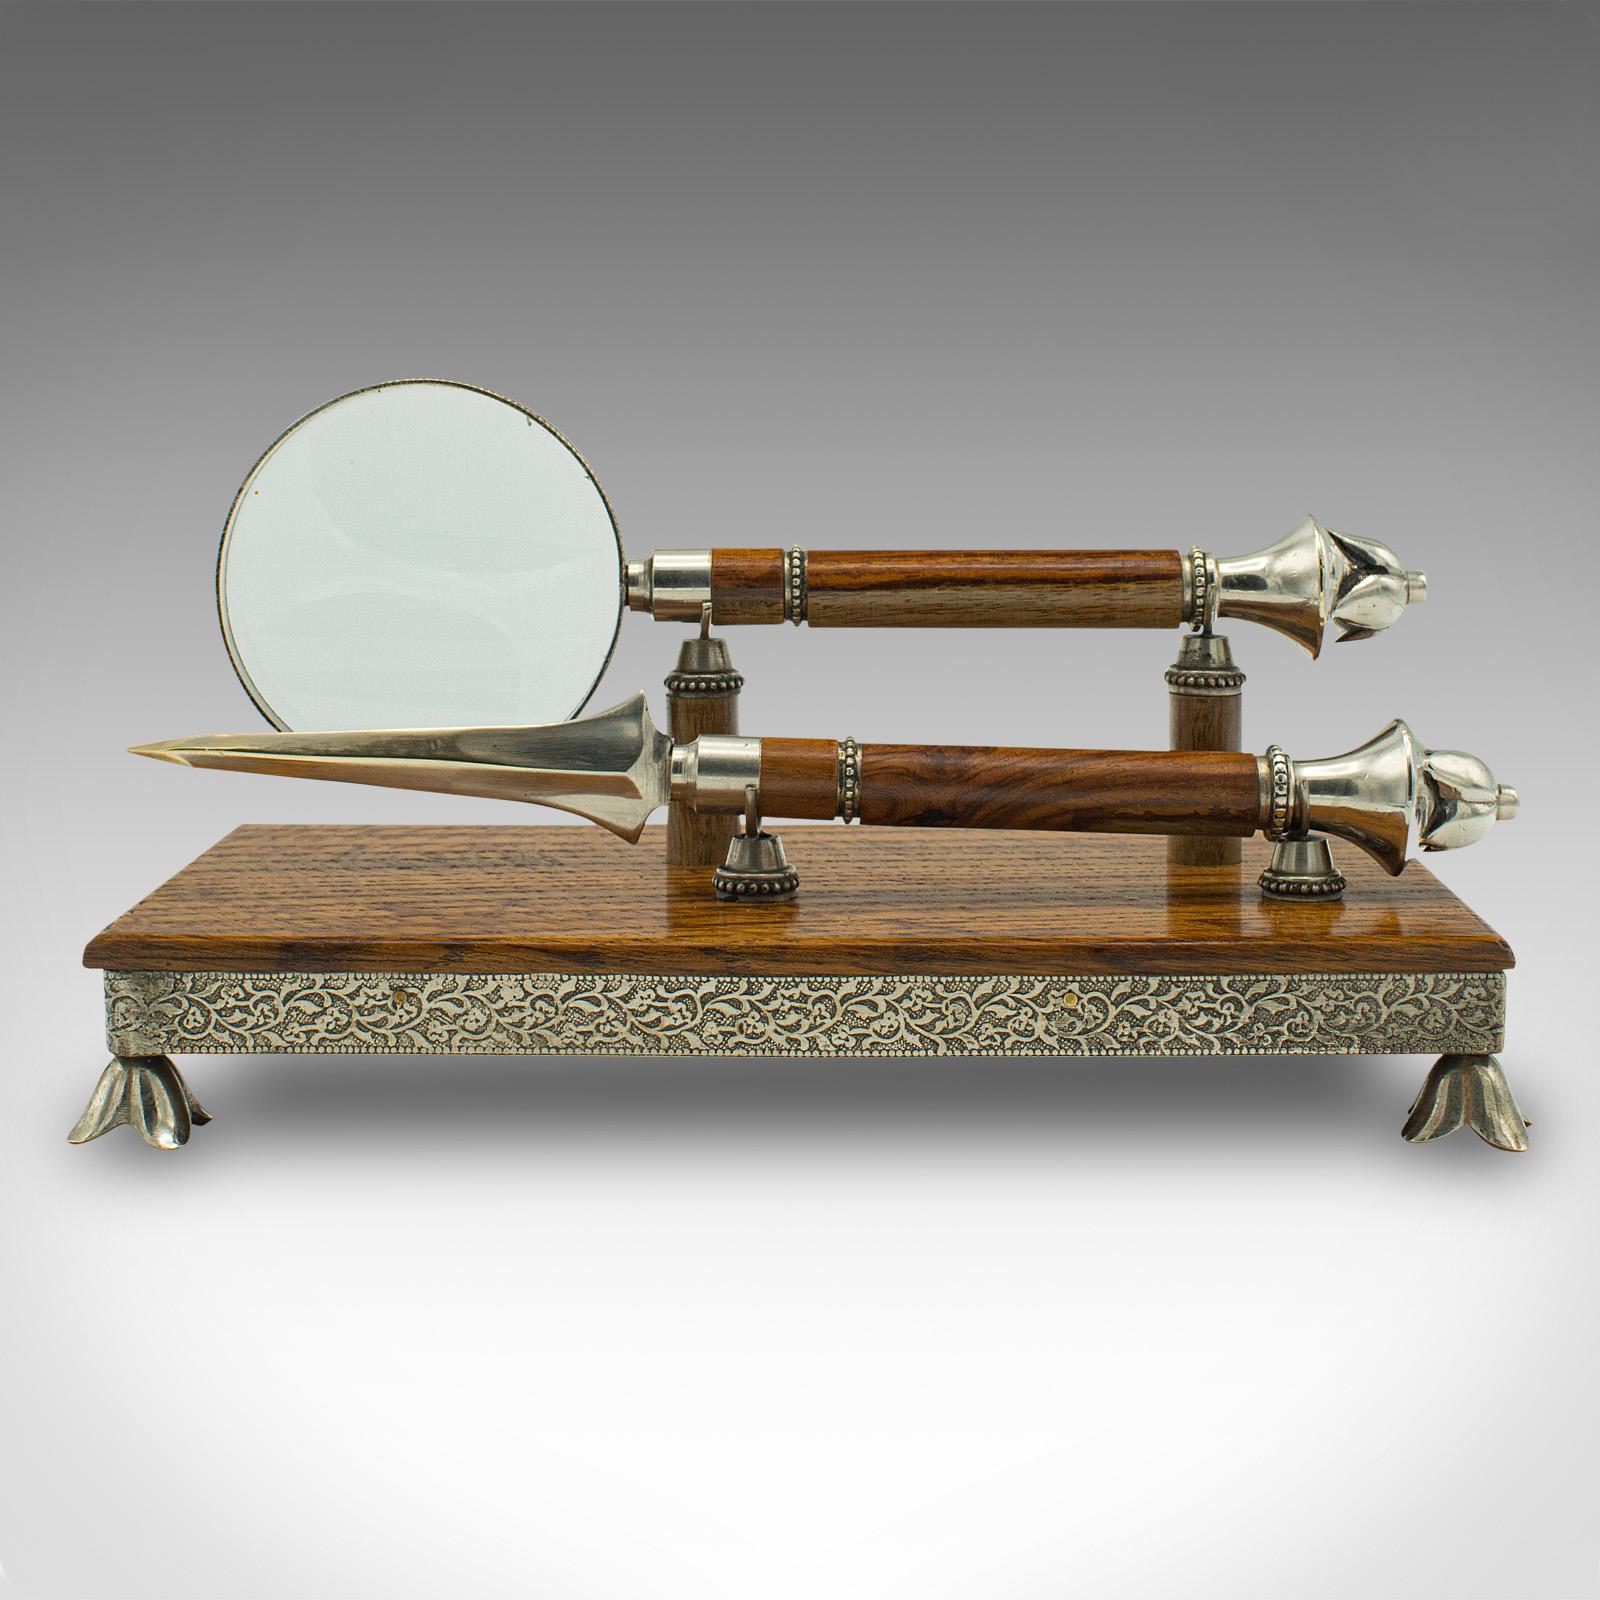 This is an antique reception desk letter set. An English, walnut and oak magnifying glass and letter opener on a stand, dating to the late Victorian period, circa 1900.

Beautifully crafted set, adding a touch of distinction to the